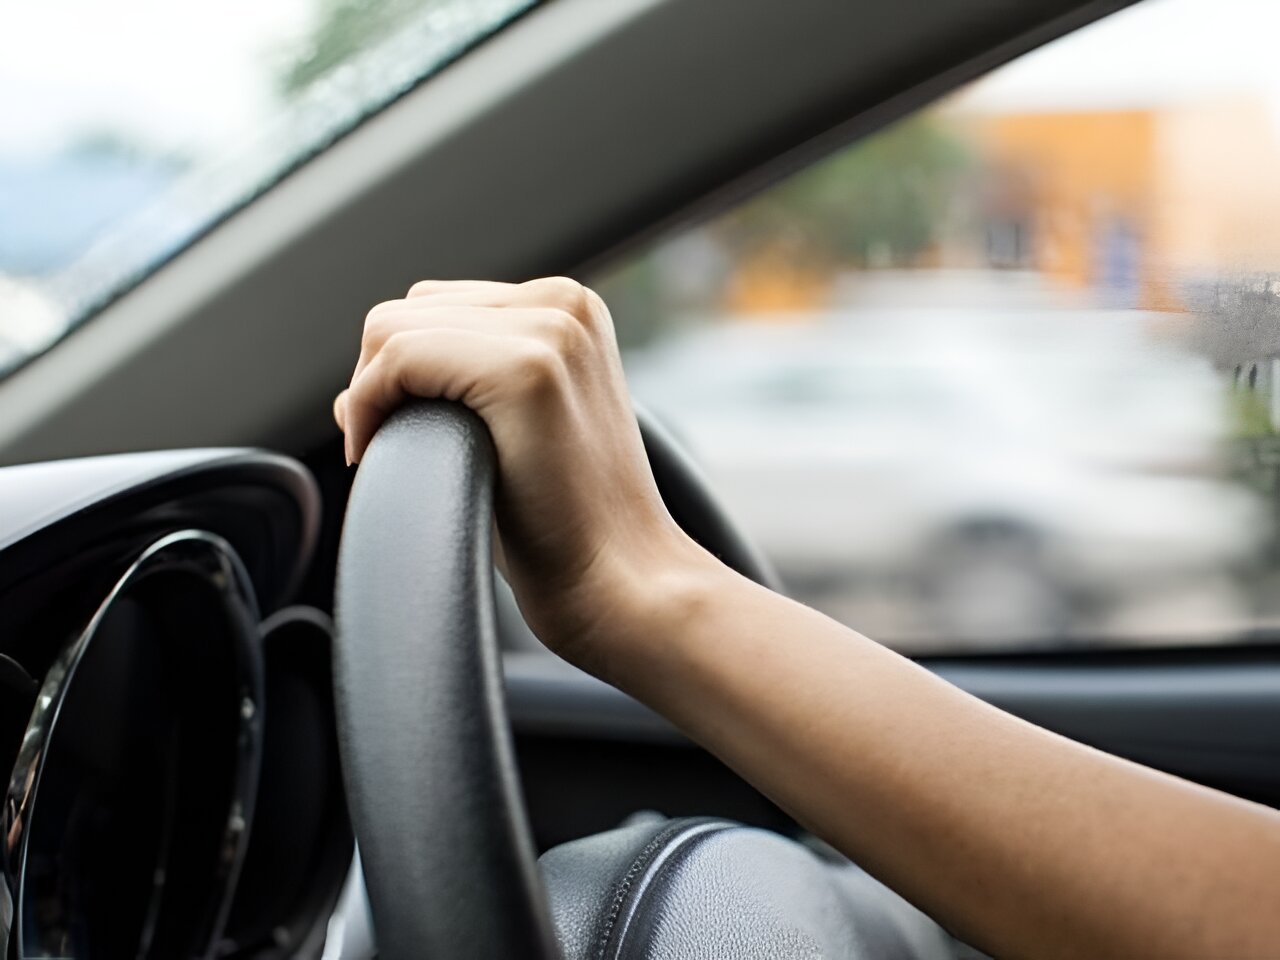 Anxious driver? There are ways to ease your stress